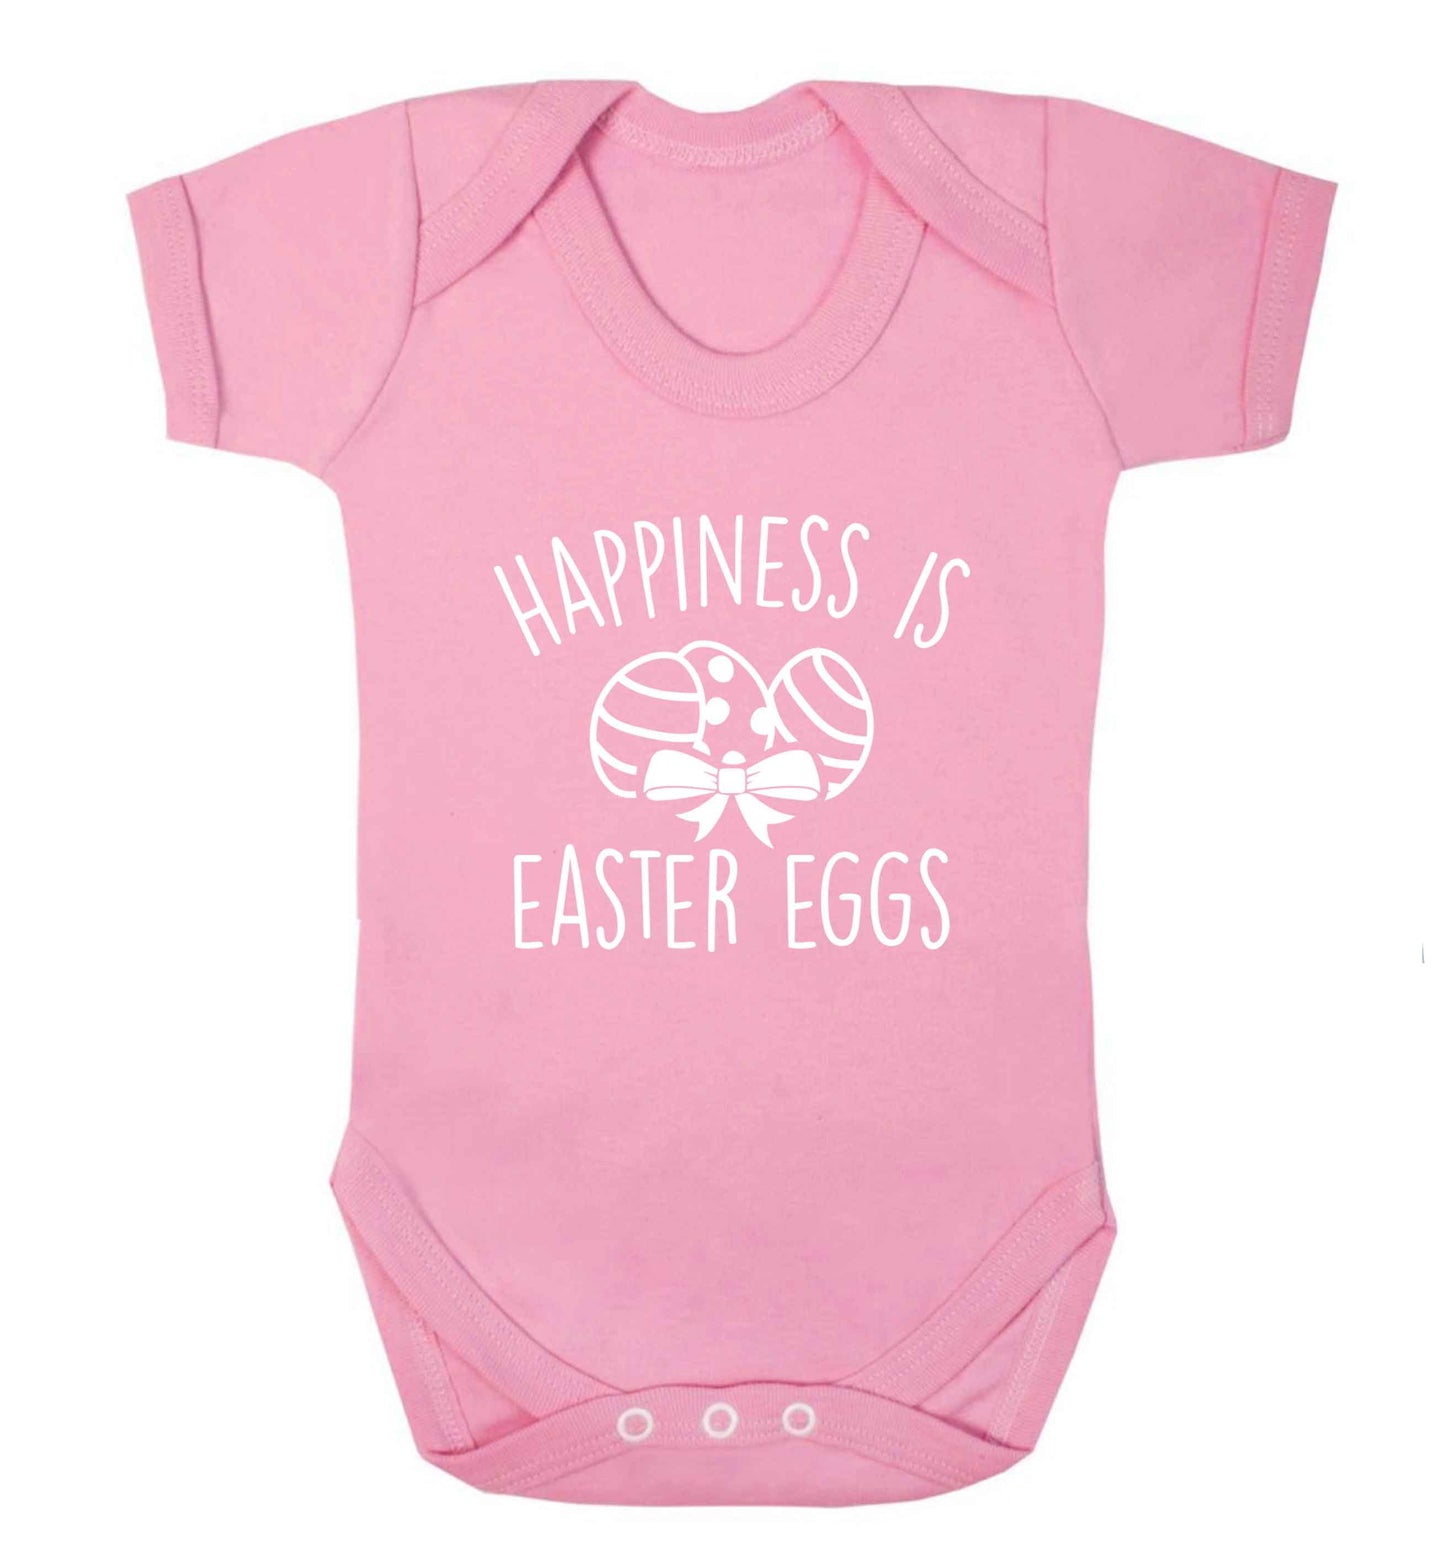 Happiness is Easter eggs baby vest pale pink 18-24 months